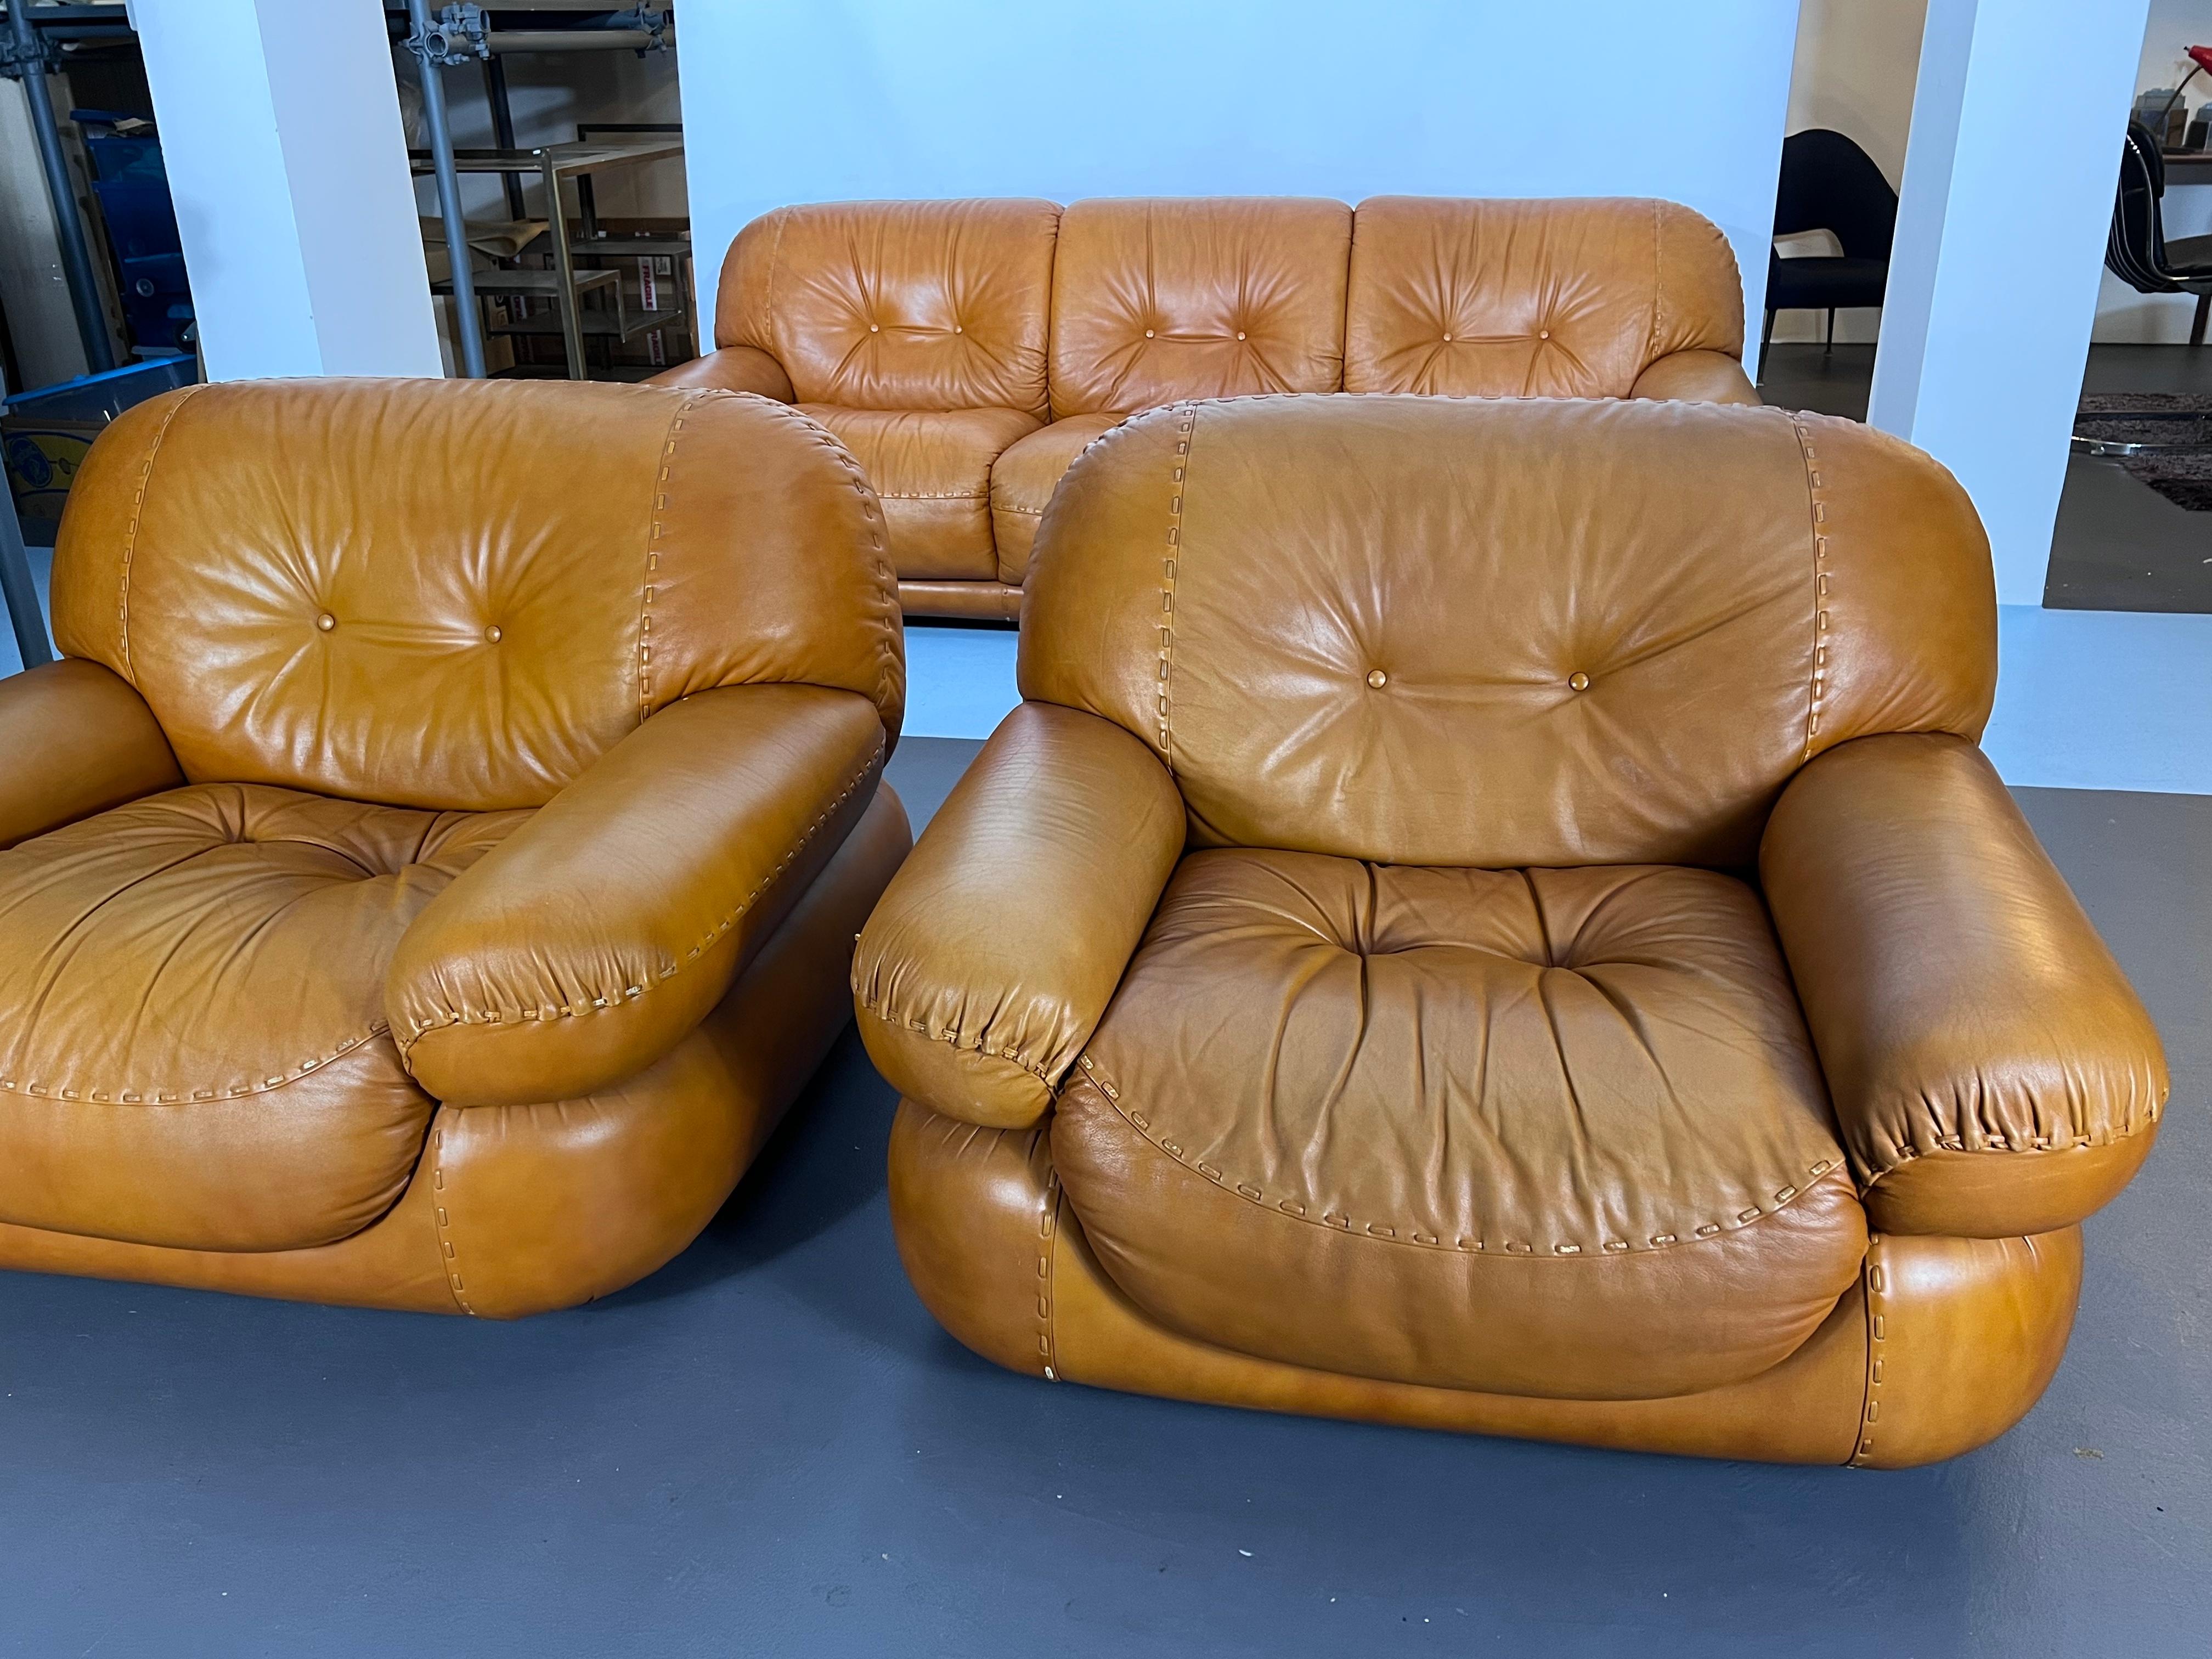 Set of two armchairs and a three seater sofa designed by Sapporo for Mobil Girgi. Cognac leather. Original vintage condition with normal trace of age and use. Foam in perfect condition. No damages. Dimensions: Sofa H 75 W 225 D 100, Armchair H 75 W